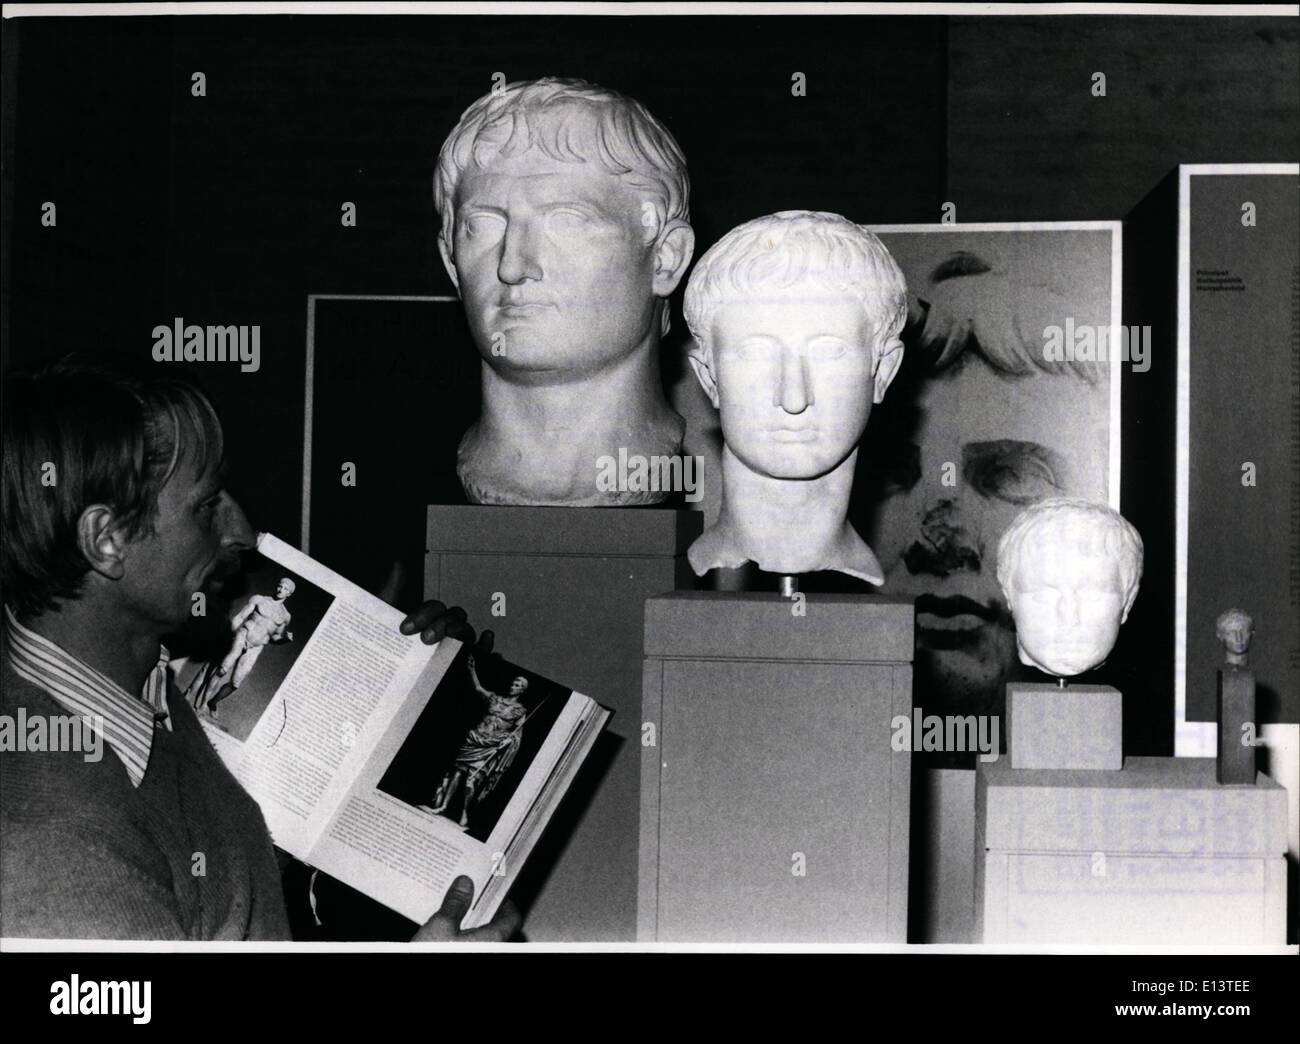 Mar. 27, 2012 - December 1st, 1978 - February 25th, 1979: Exhibition ''Pictures of Augustus/Imperour-image and policy in the ''Casearian Rom'' at Munich: Augustus - sculptures in many variations... shows at exhibition, which was opened at December 1st, 1978 in the Munich Glyptothek. Under the title ''Pictures of Augustus/Imperiour-image and policy in the caesarian Rome'' 91 portrait busts are shown. This exhibition includes originals from the Glyptothek and loaned supplies and also duplicates from sculptures of foreign museums Stock Photo